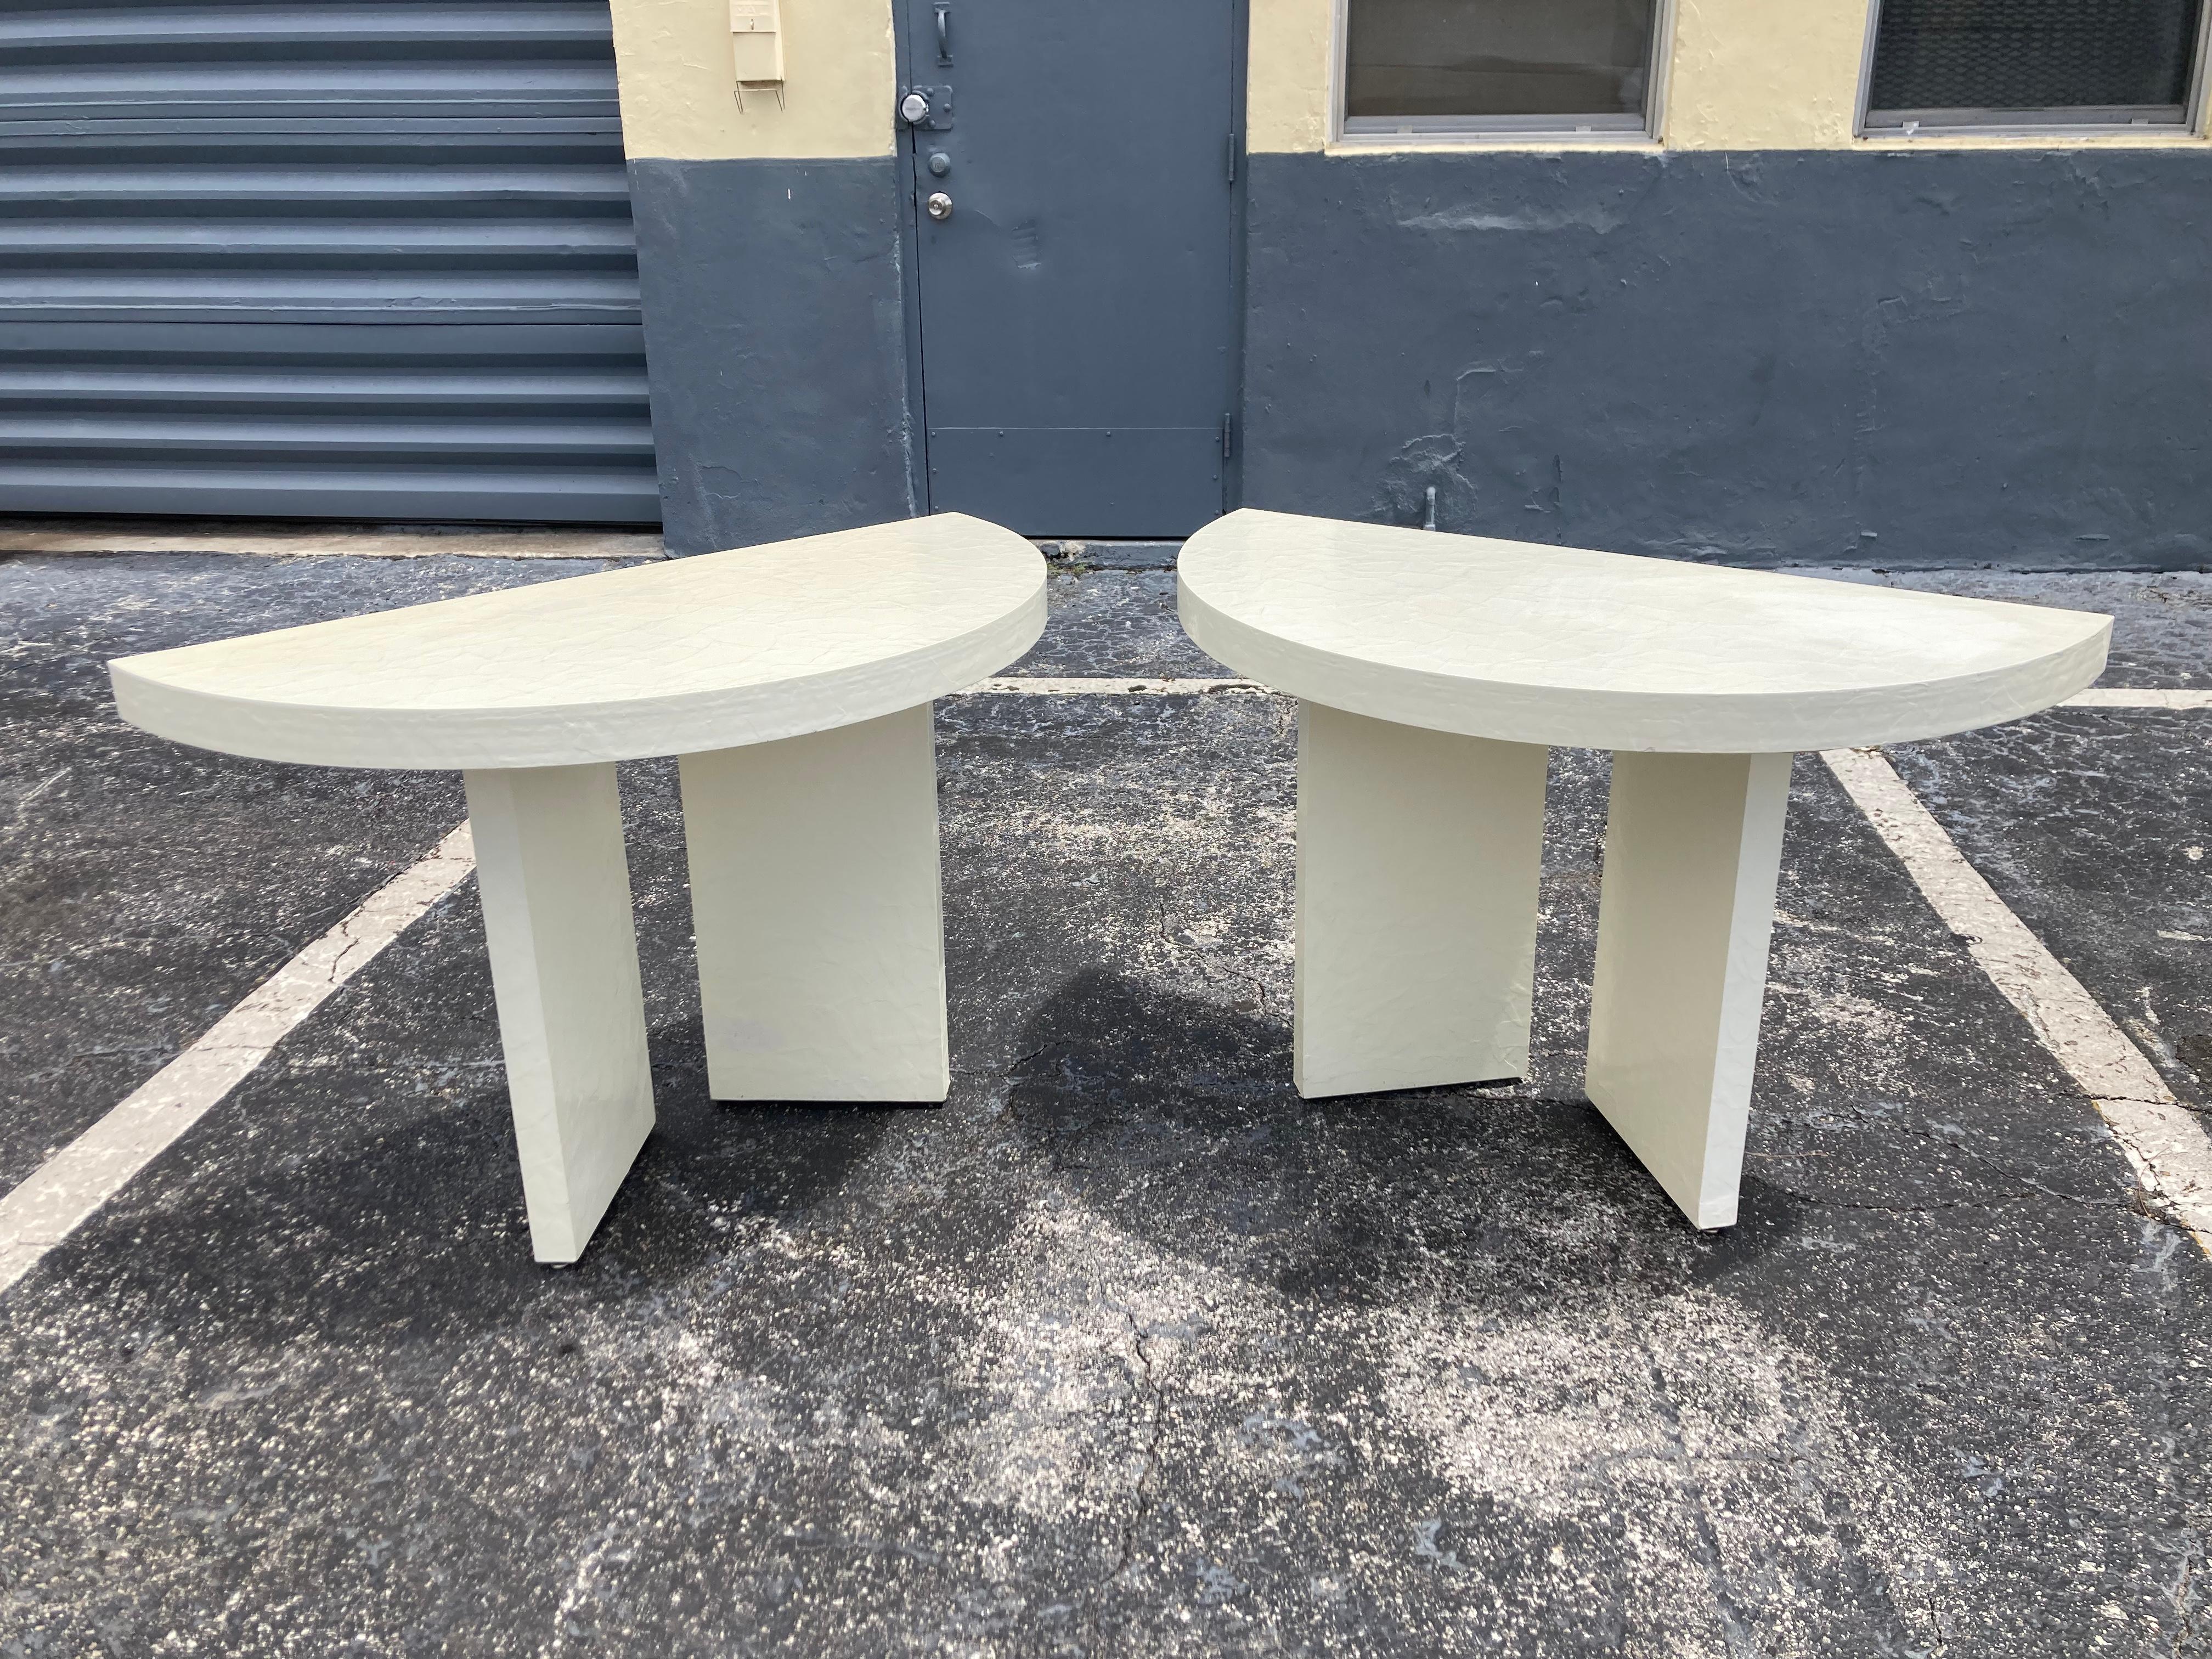 Pair of Demi-Lune Tables, paper patch work design with paint finish. Seller will have tables refinished.